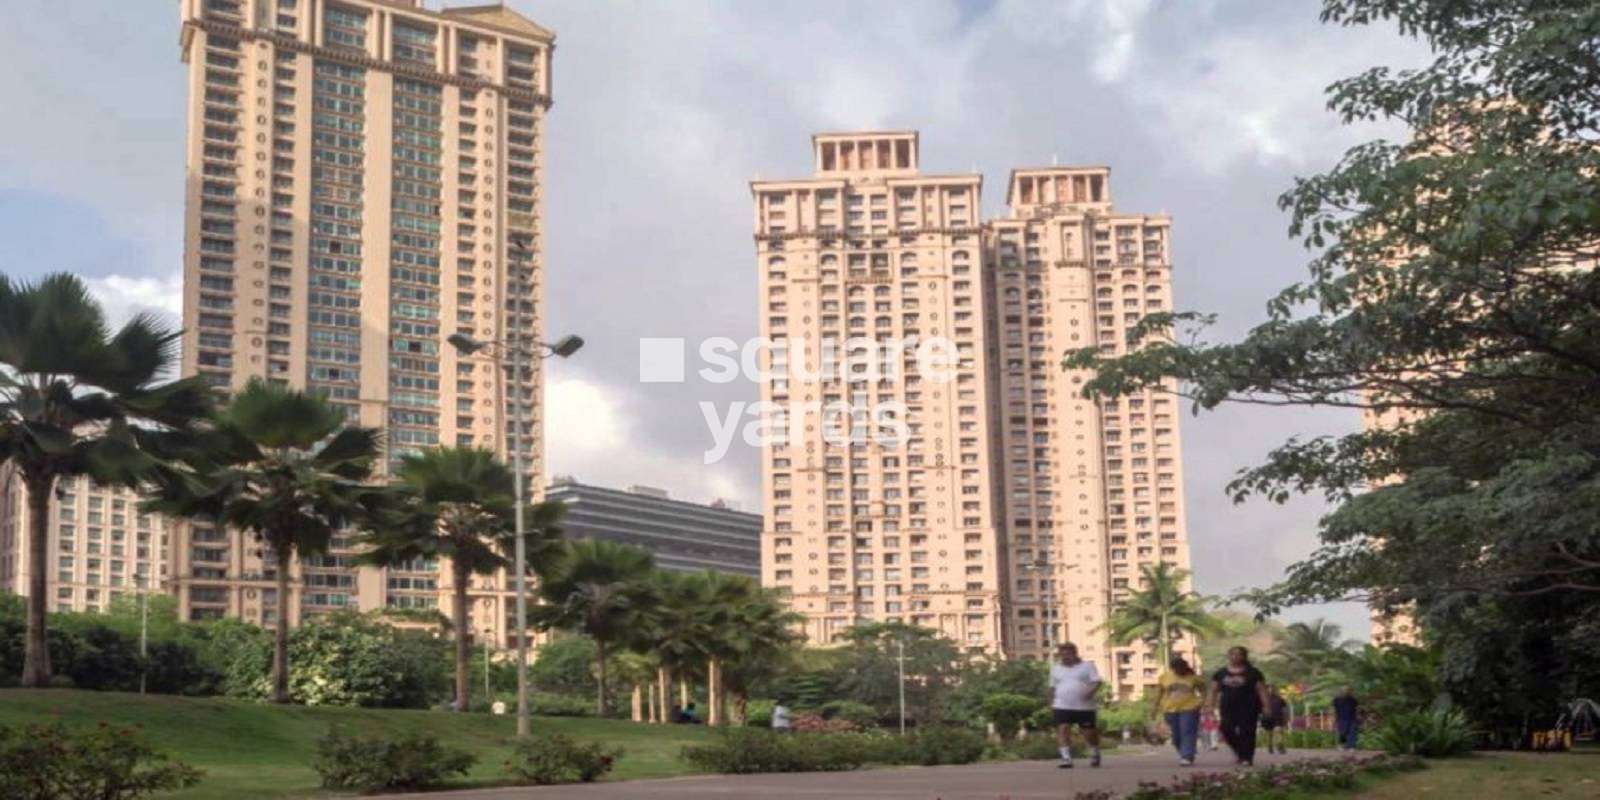 hiranandani heritage tower project tower view1